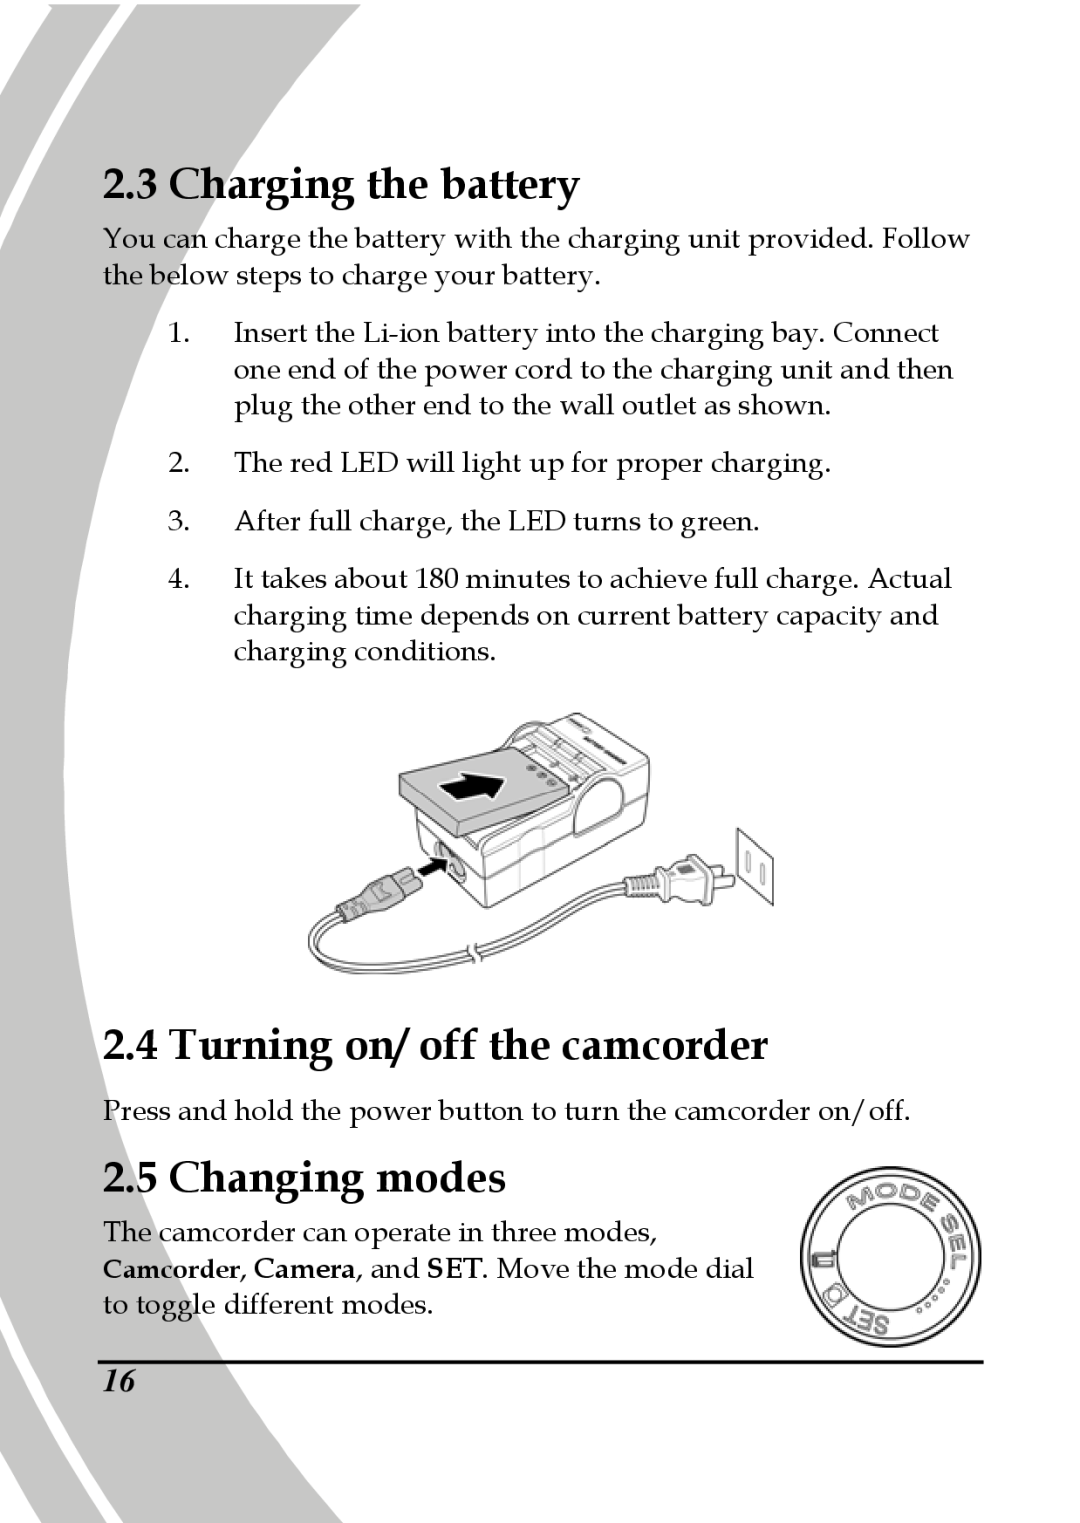 DXG Technology DXG-595V manual Charging the battery, Turning on/ off the camcorder, Changing modes 